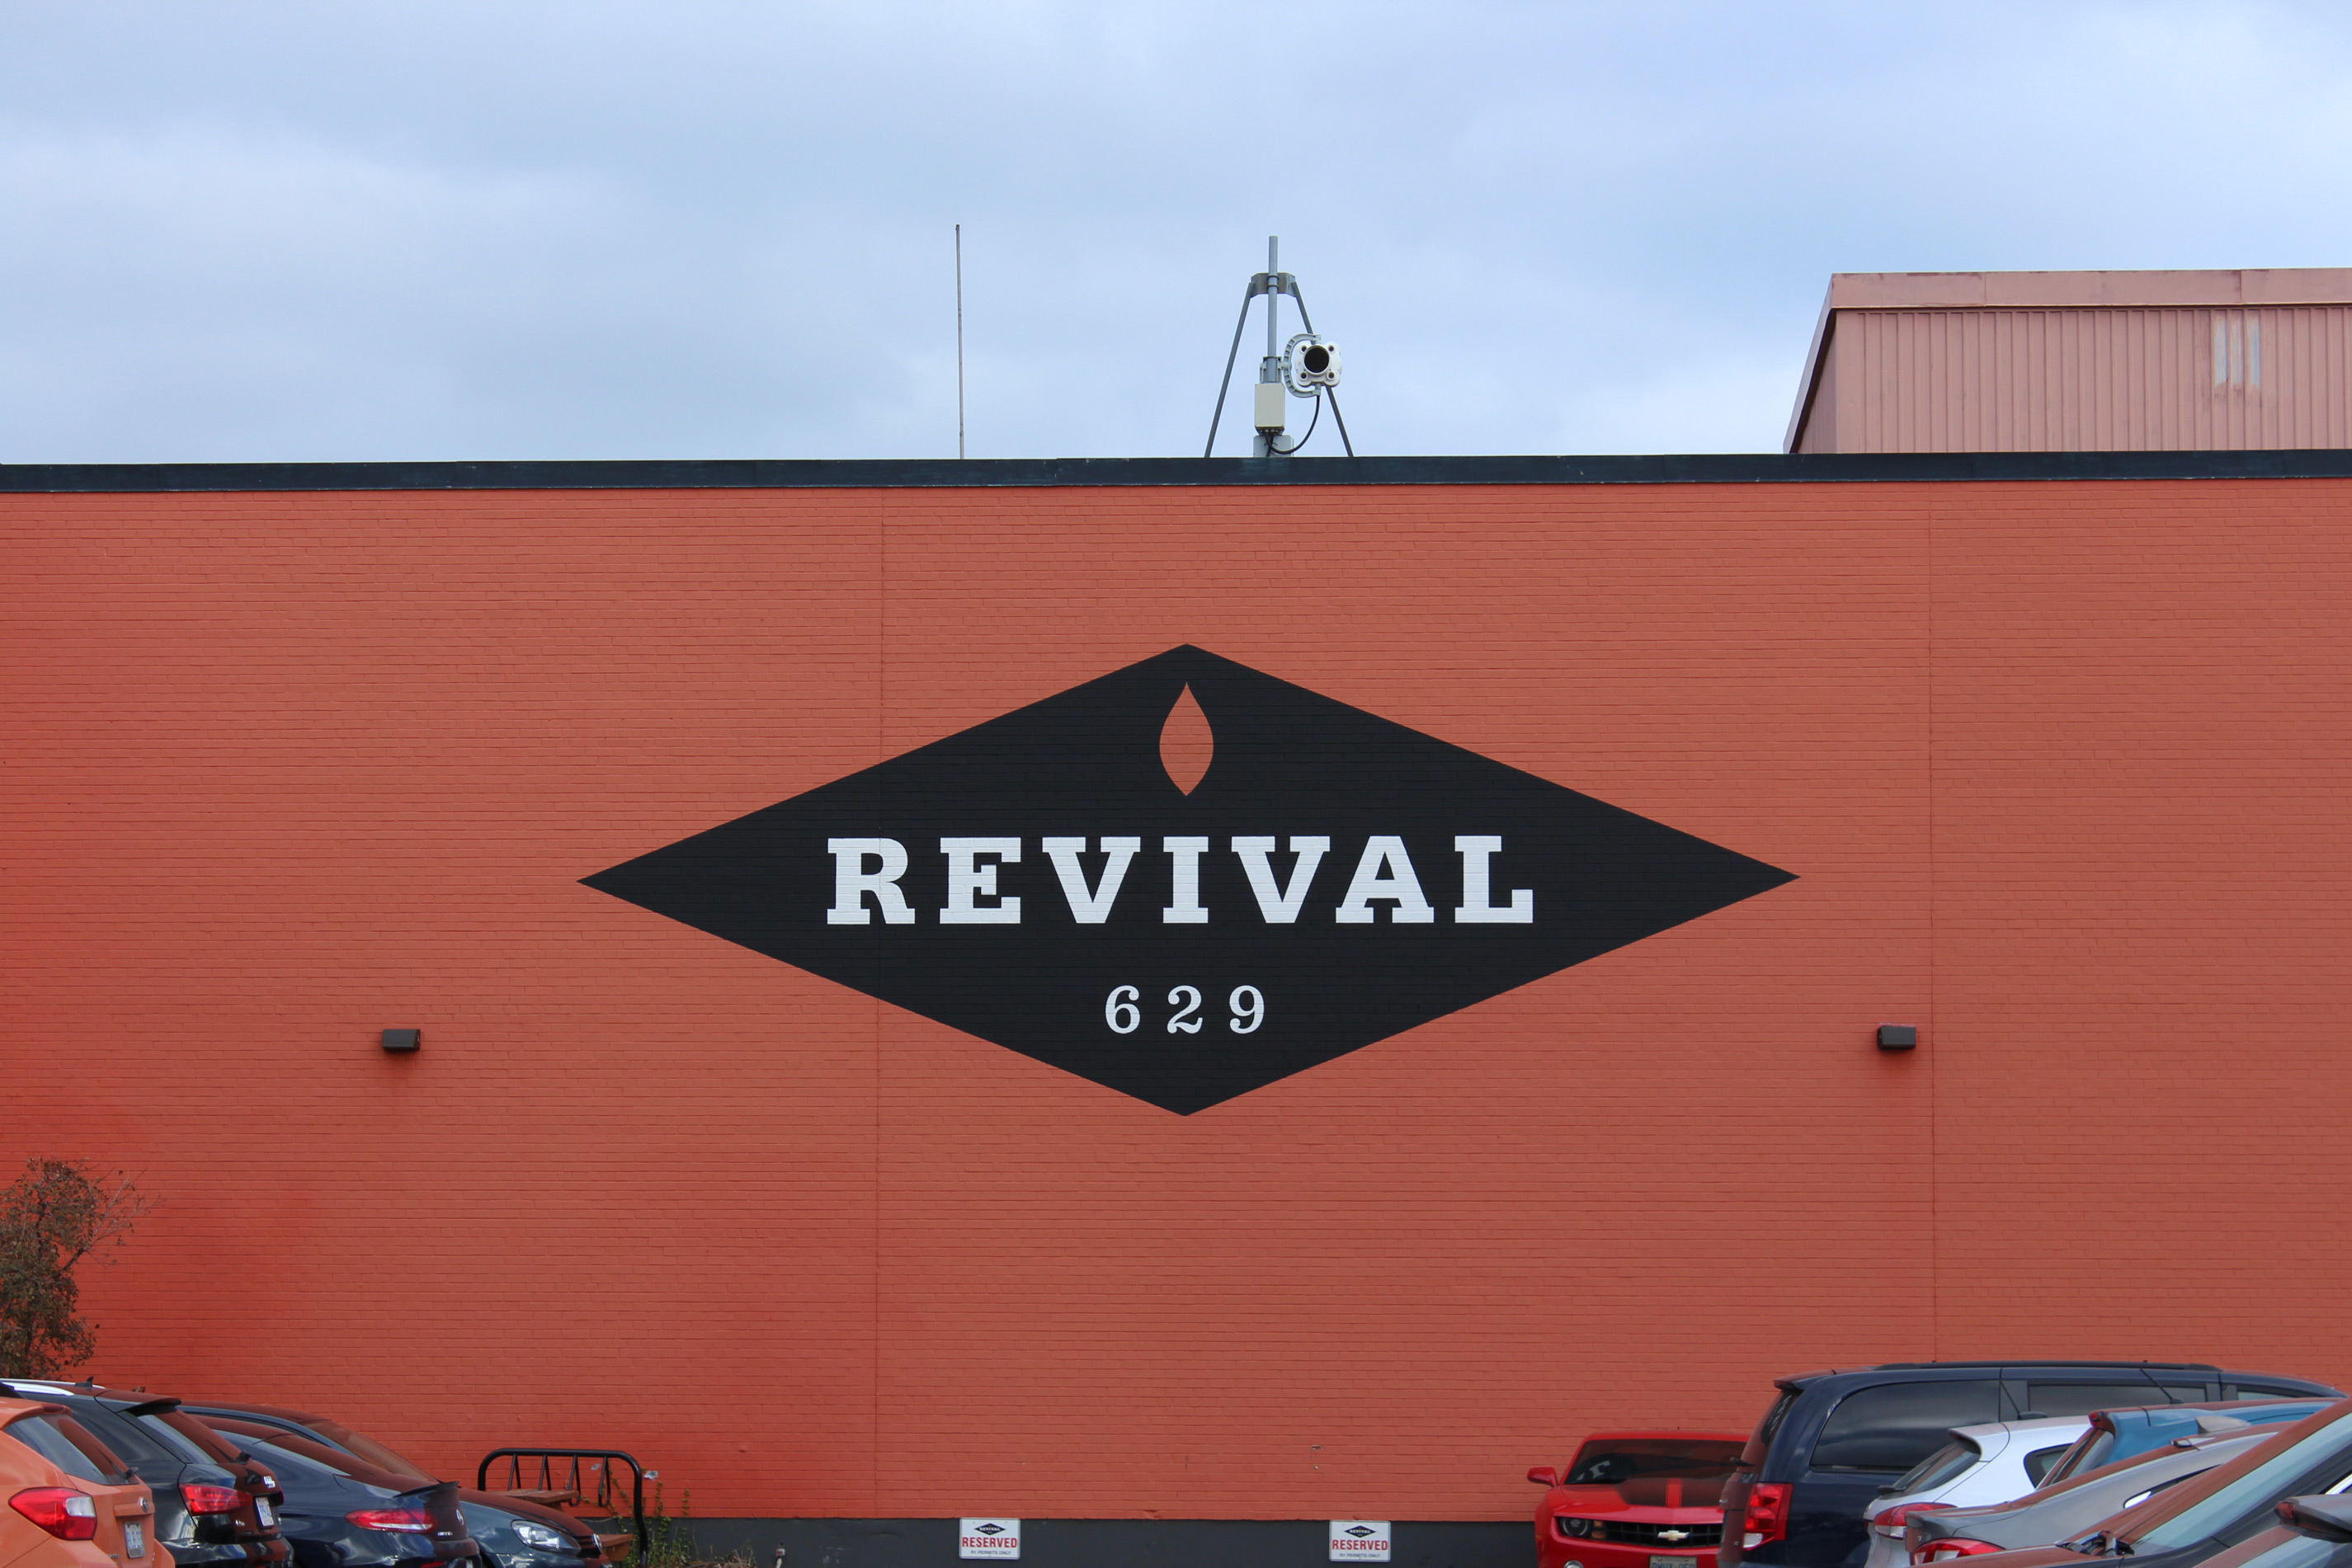 Revival Film Studio's side wall by parking lot. - Brick colour is Victorian Flash